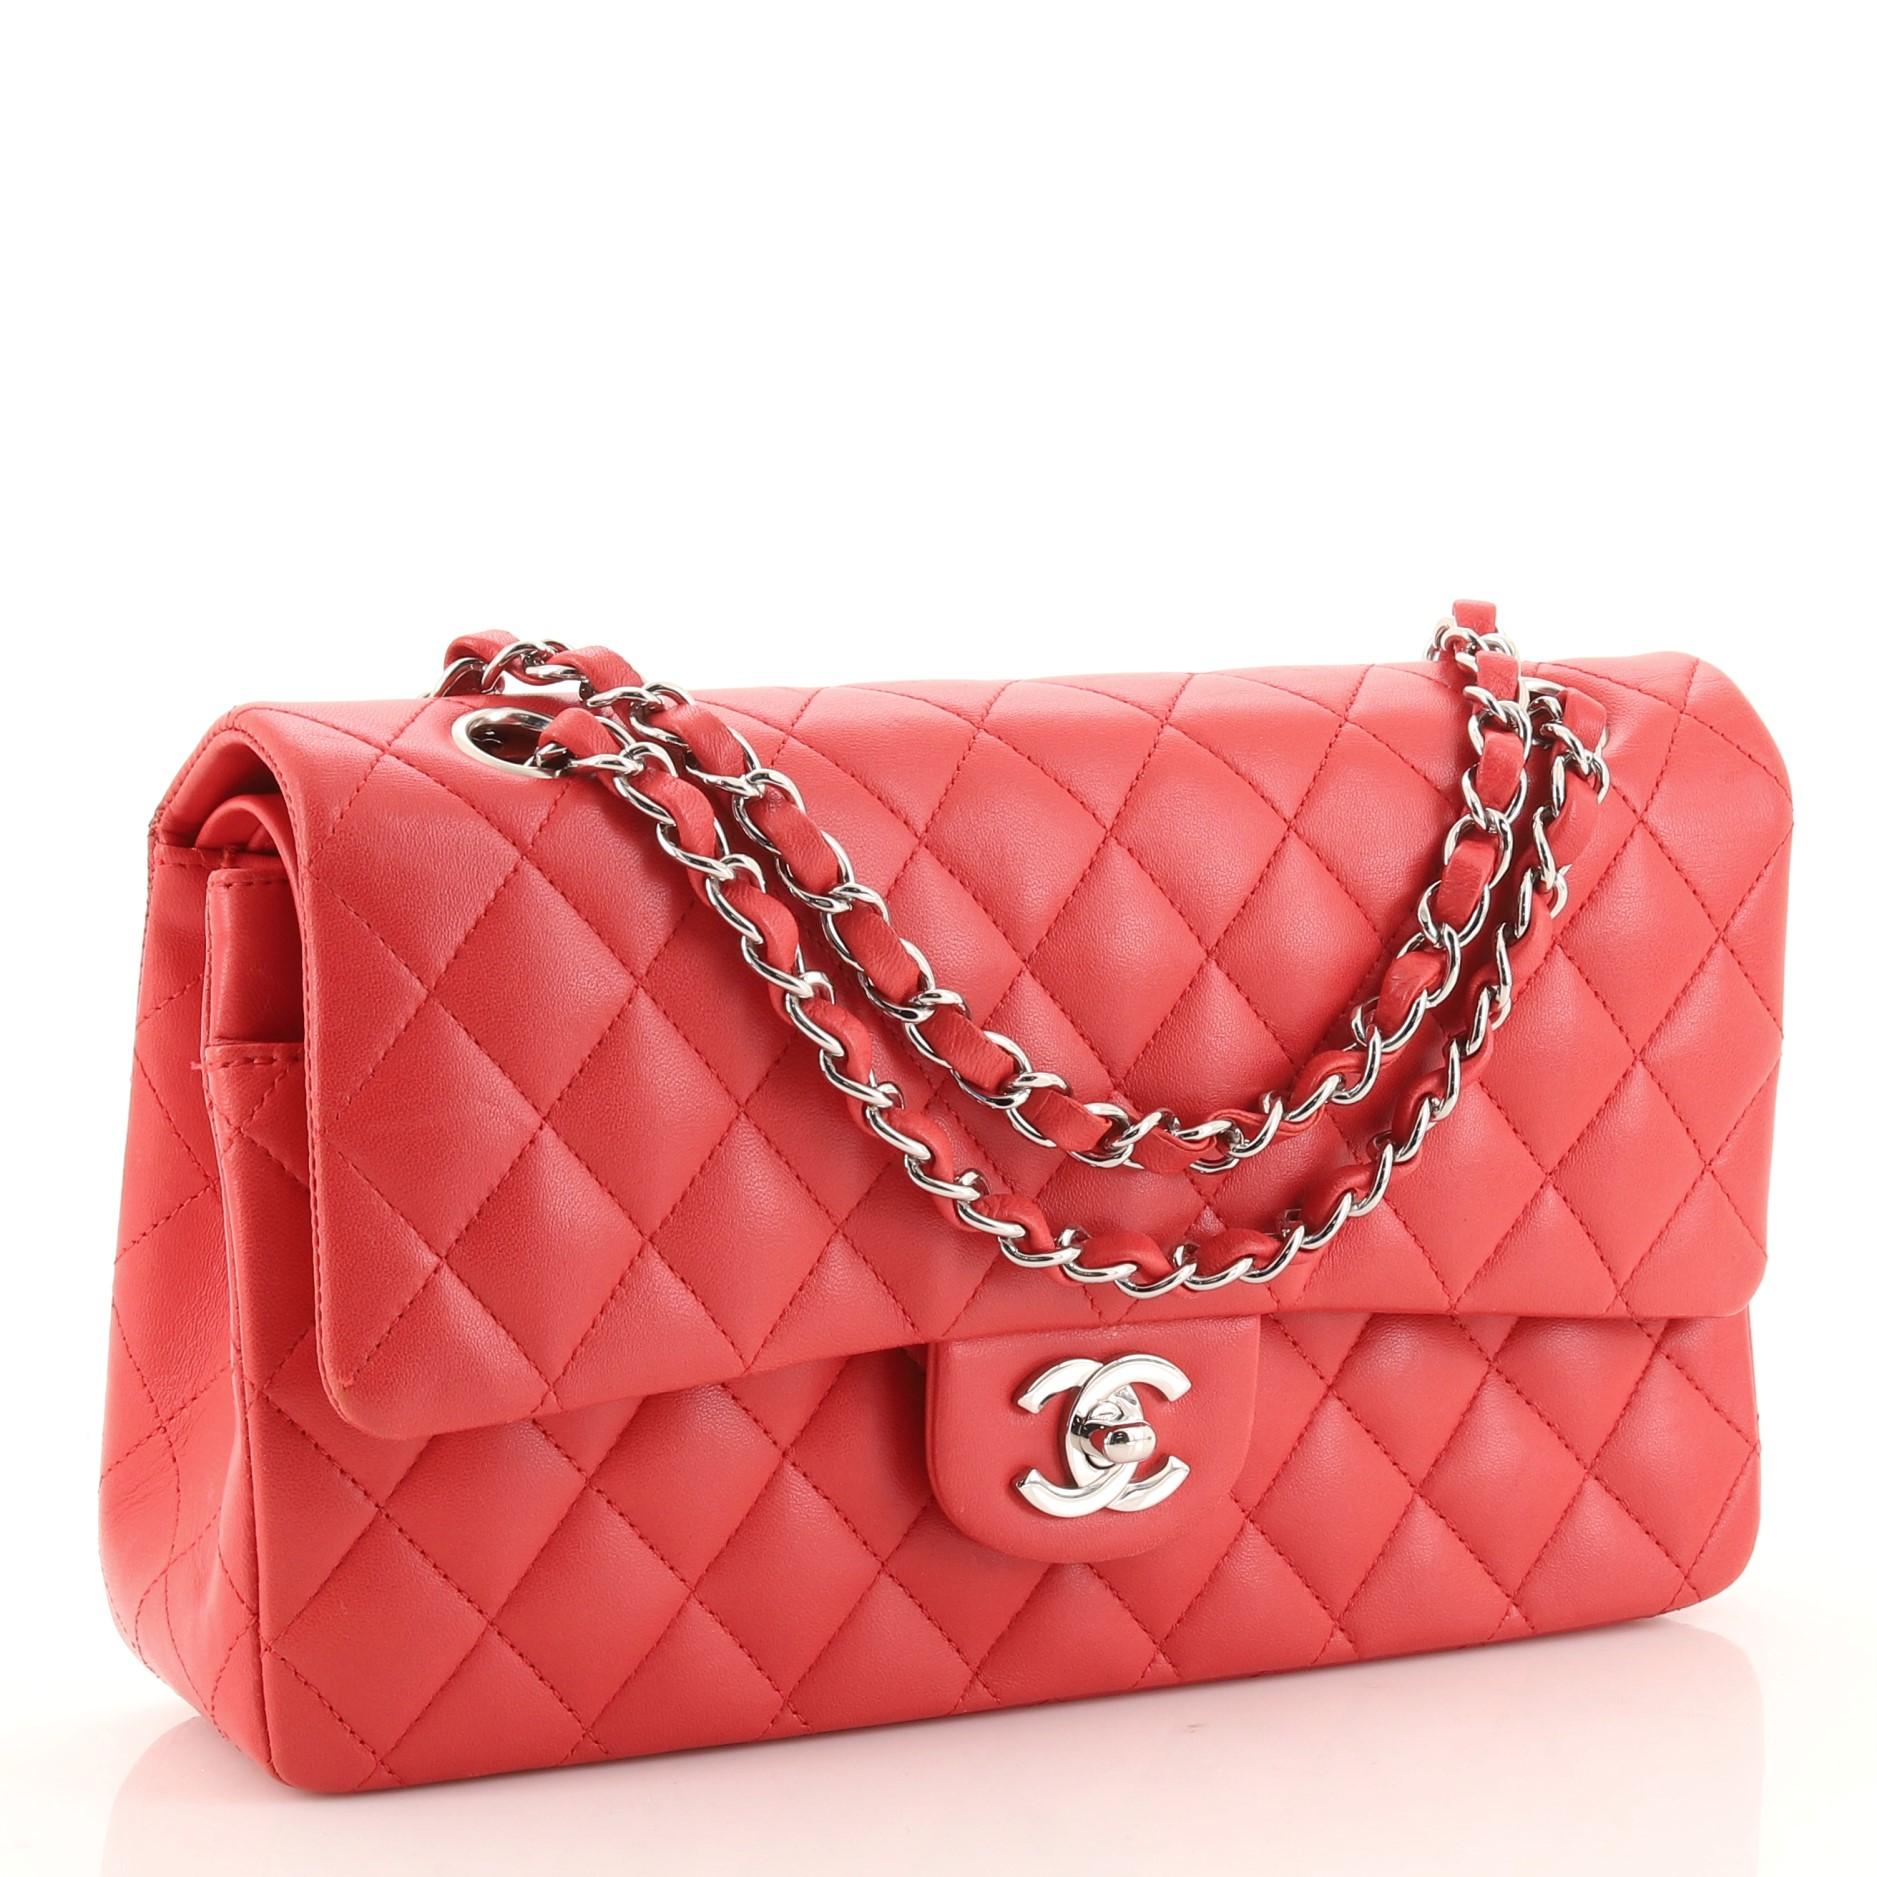 Red Chanel Vintage Classic Double Flap Bag Quilted Lambskin Medium